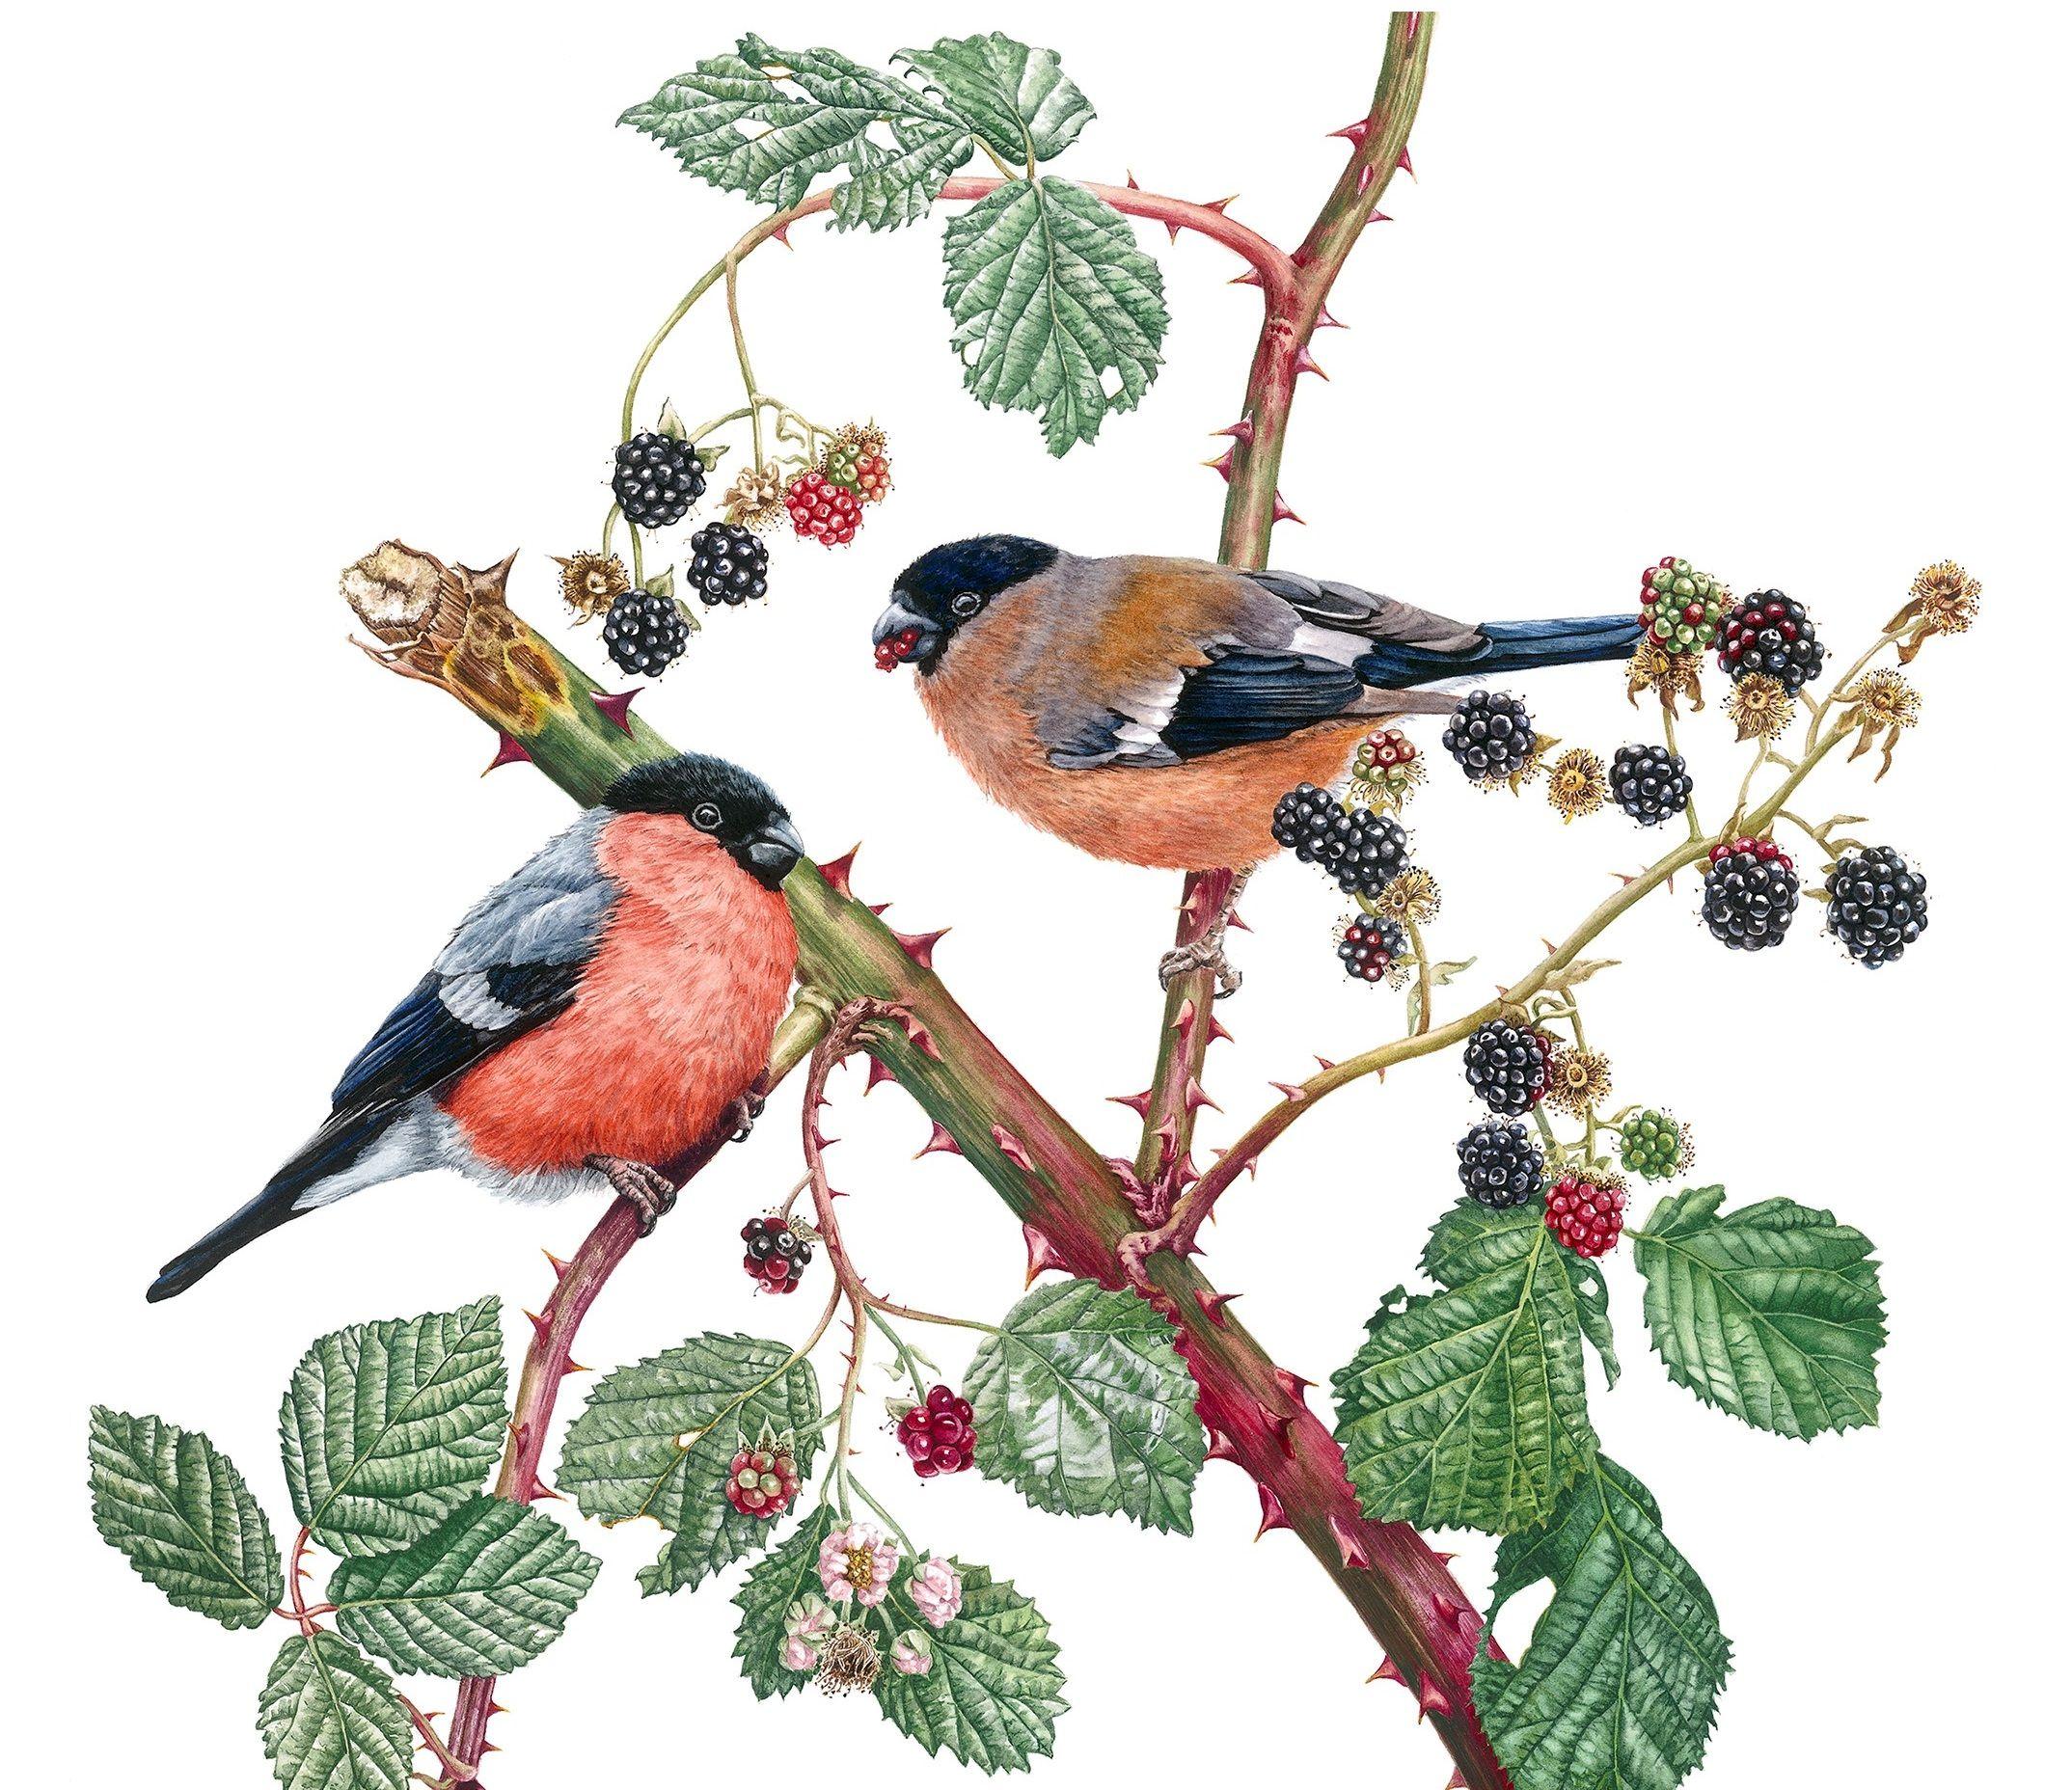 Bullfinches and Blackberries, Painting, Watercolor on Paper